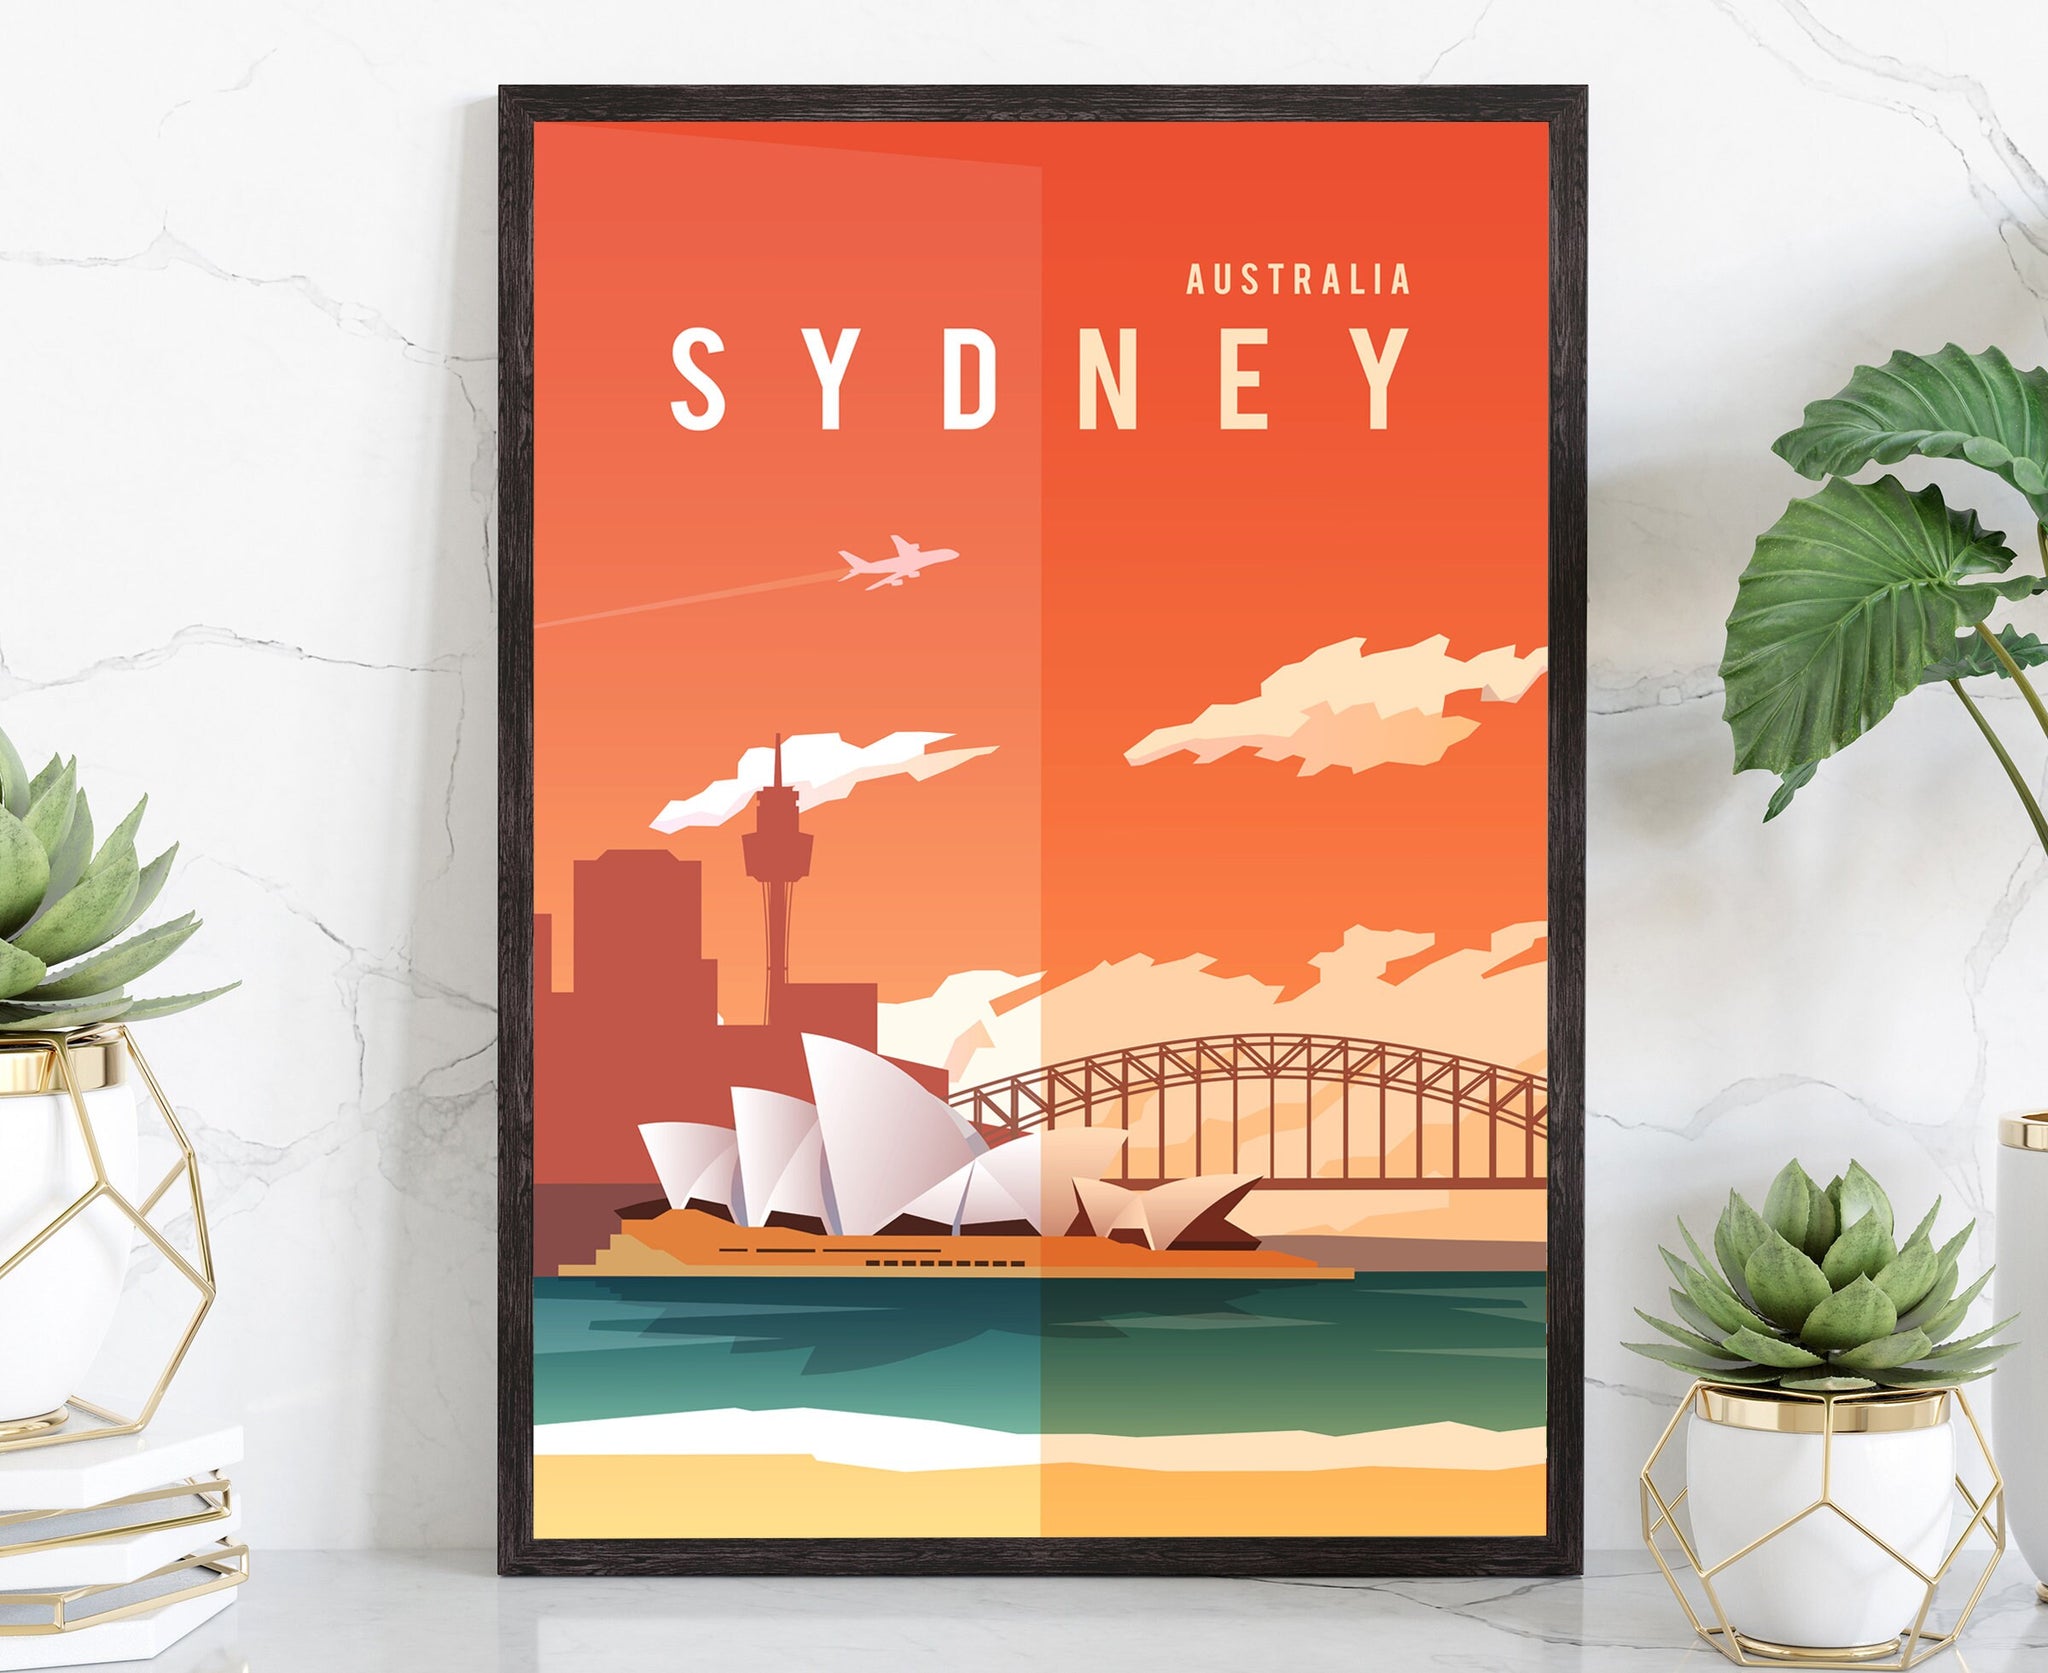 Retro Style Travel Poster, Australia Sydney Vintage Rustic Poster Print, Home Wall Art, Office Wall Decor,  Australia Sydney, City Travel